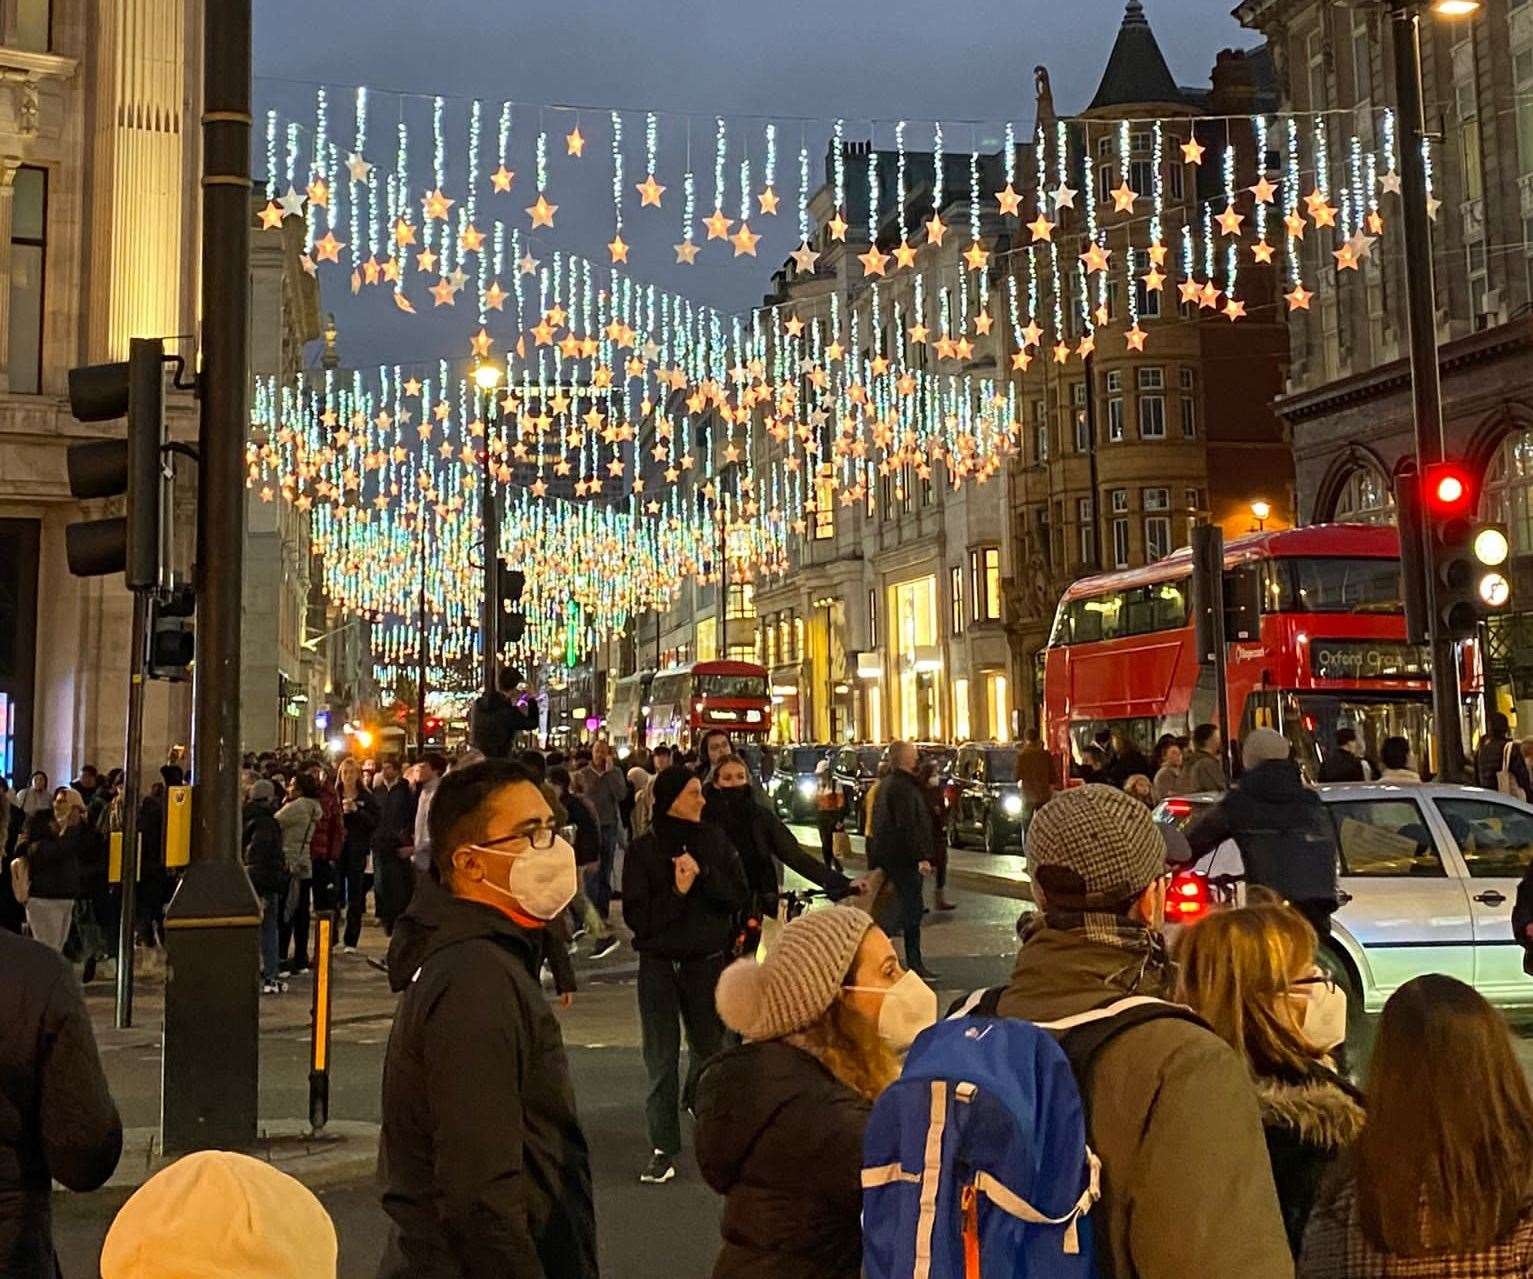 Central London was as busy as you'd expect on a Saturday as Chirstmas shopping hits full flow